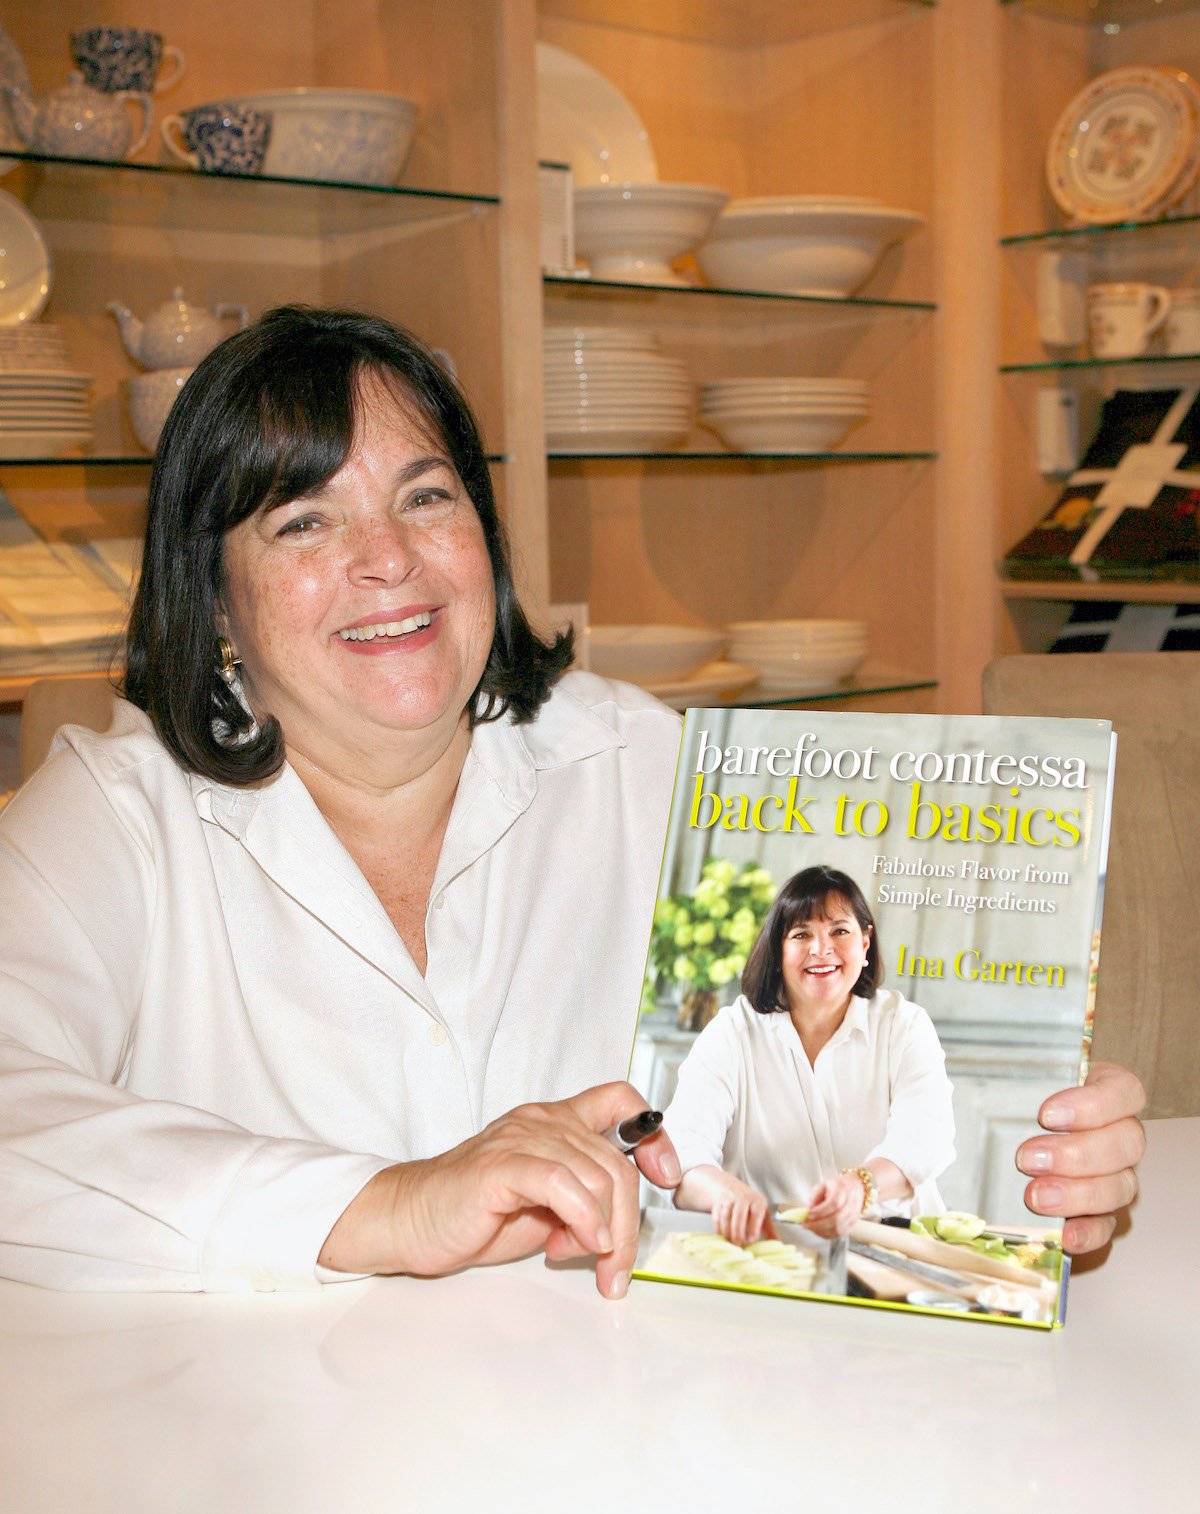 Ina Garten at a book signing at William Sonoma 